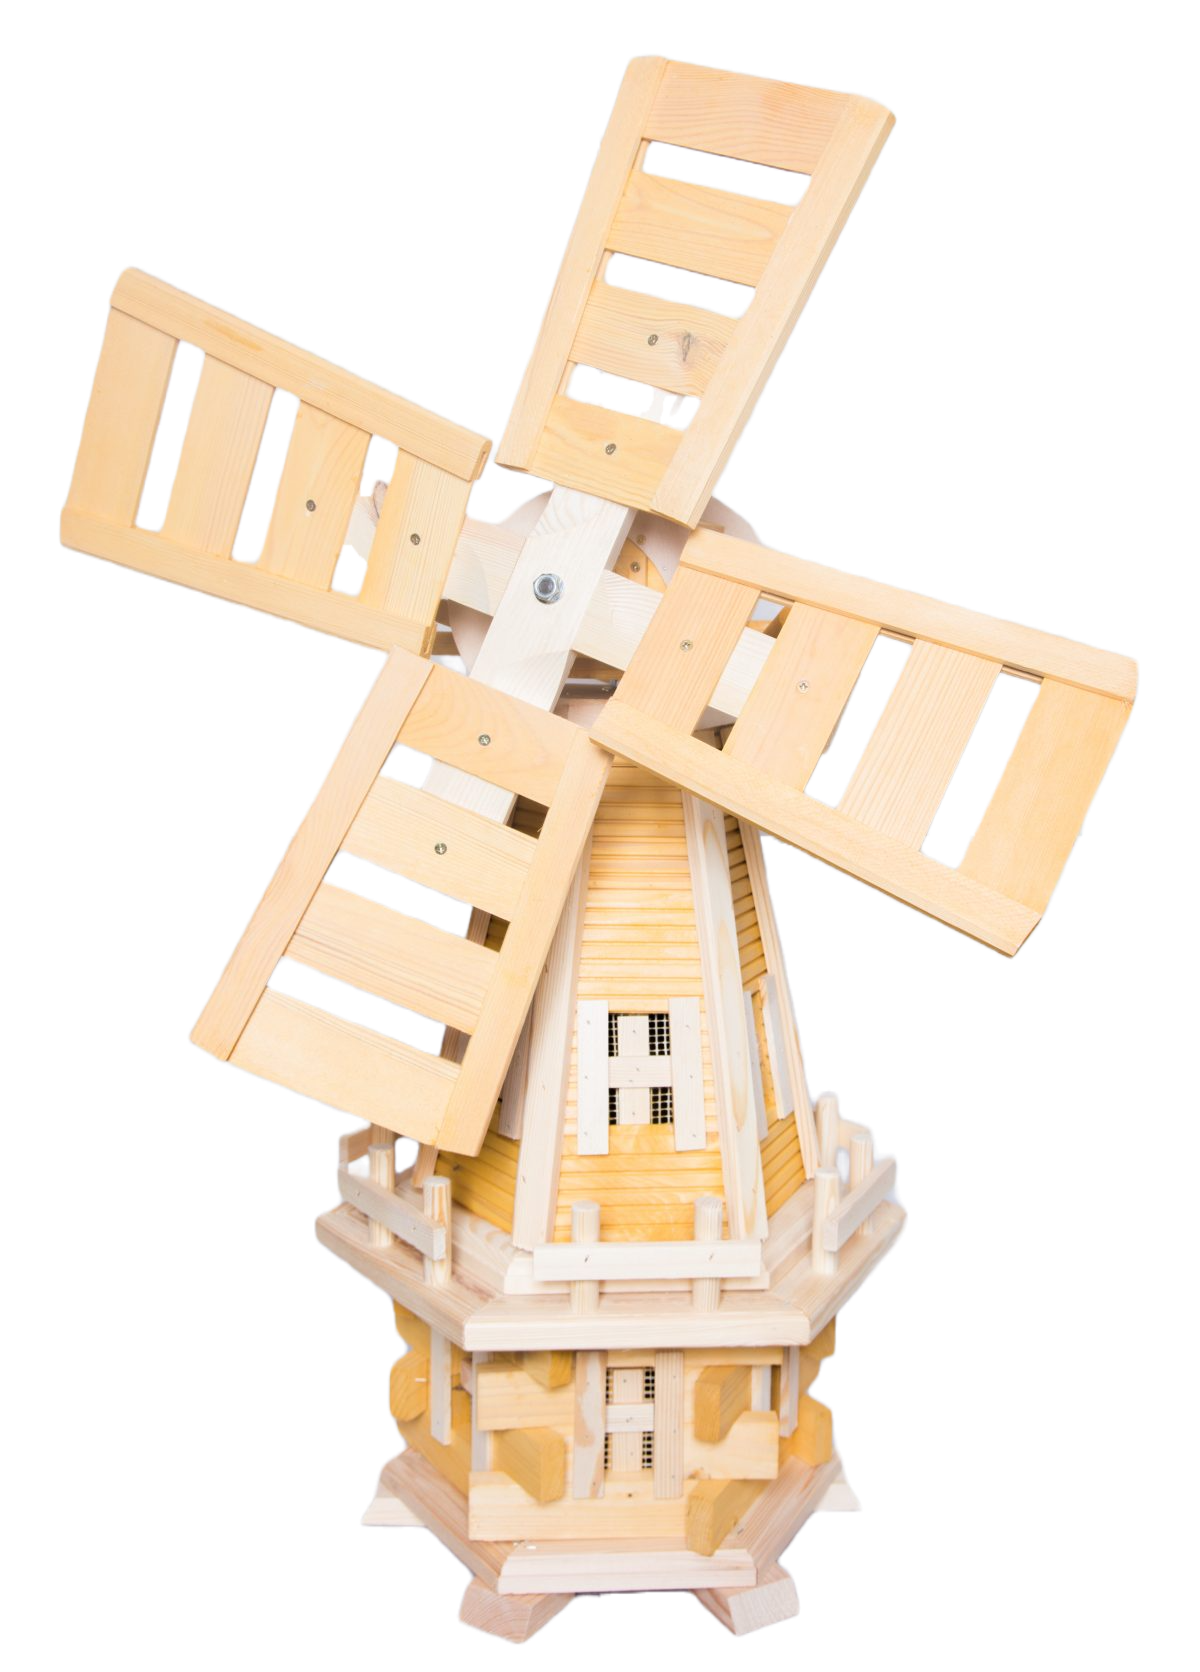 "Handcrafted wooden garden windmill featuring a classic design with rotating blades, adding rustic charm and movement to your outdoor space."